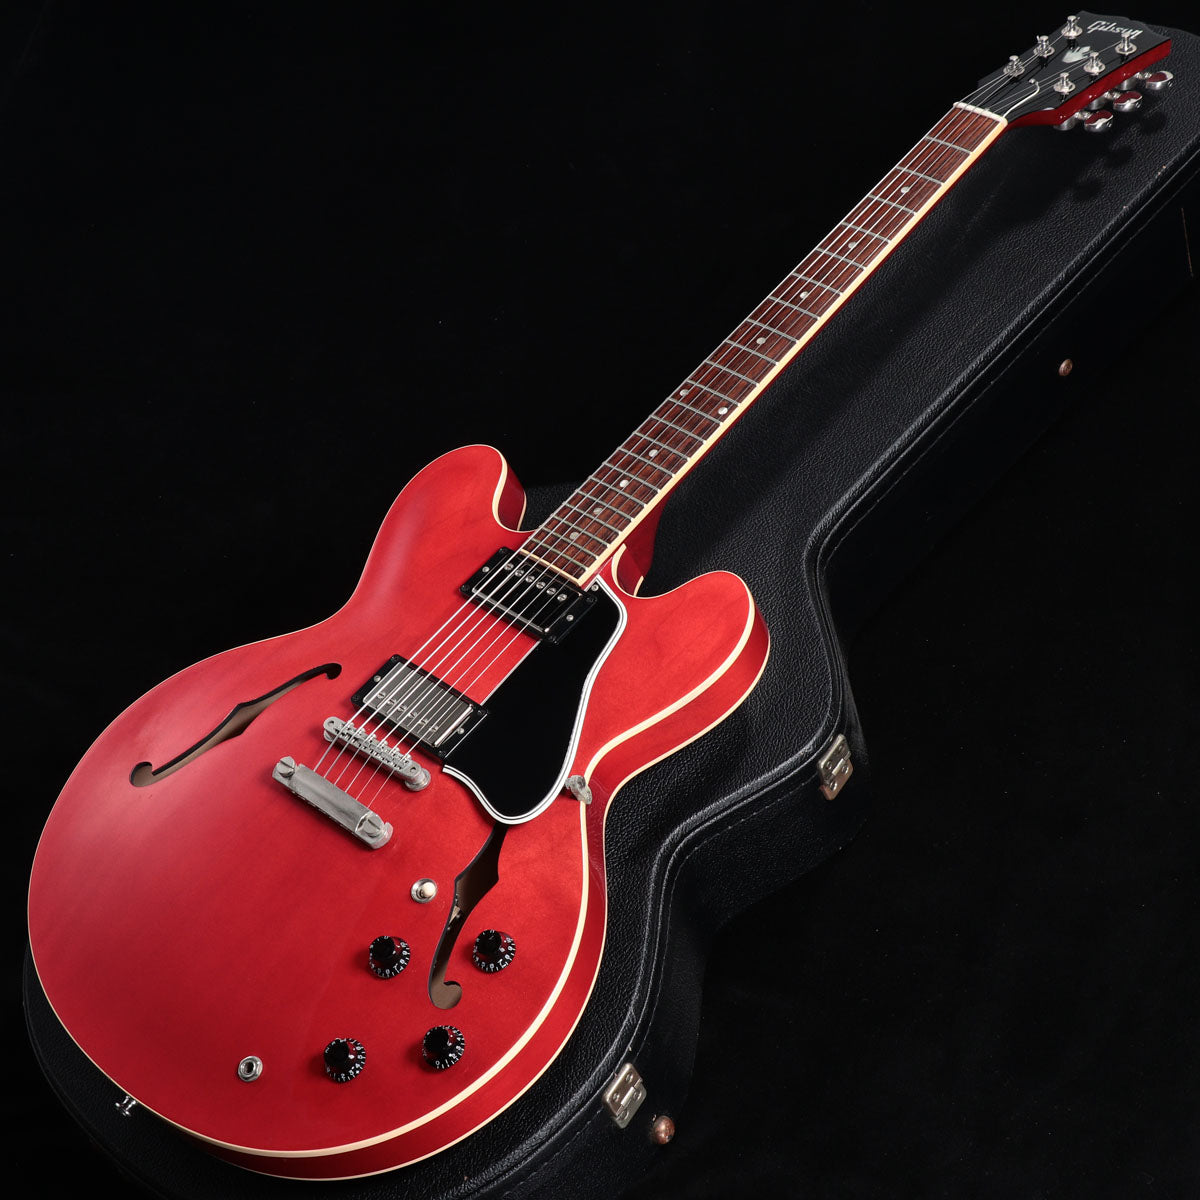 [SN 12720714] USED GIBSON CUSTOM / ES-335 DOT Cherry (with neck repair) [05]